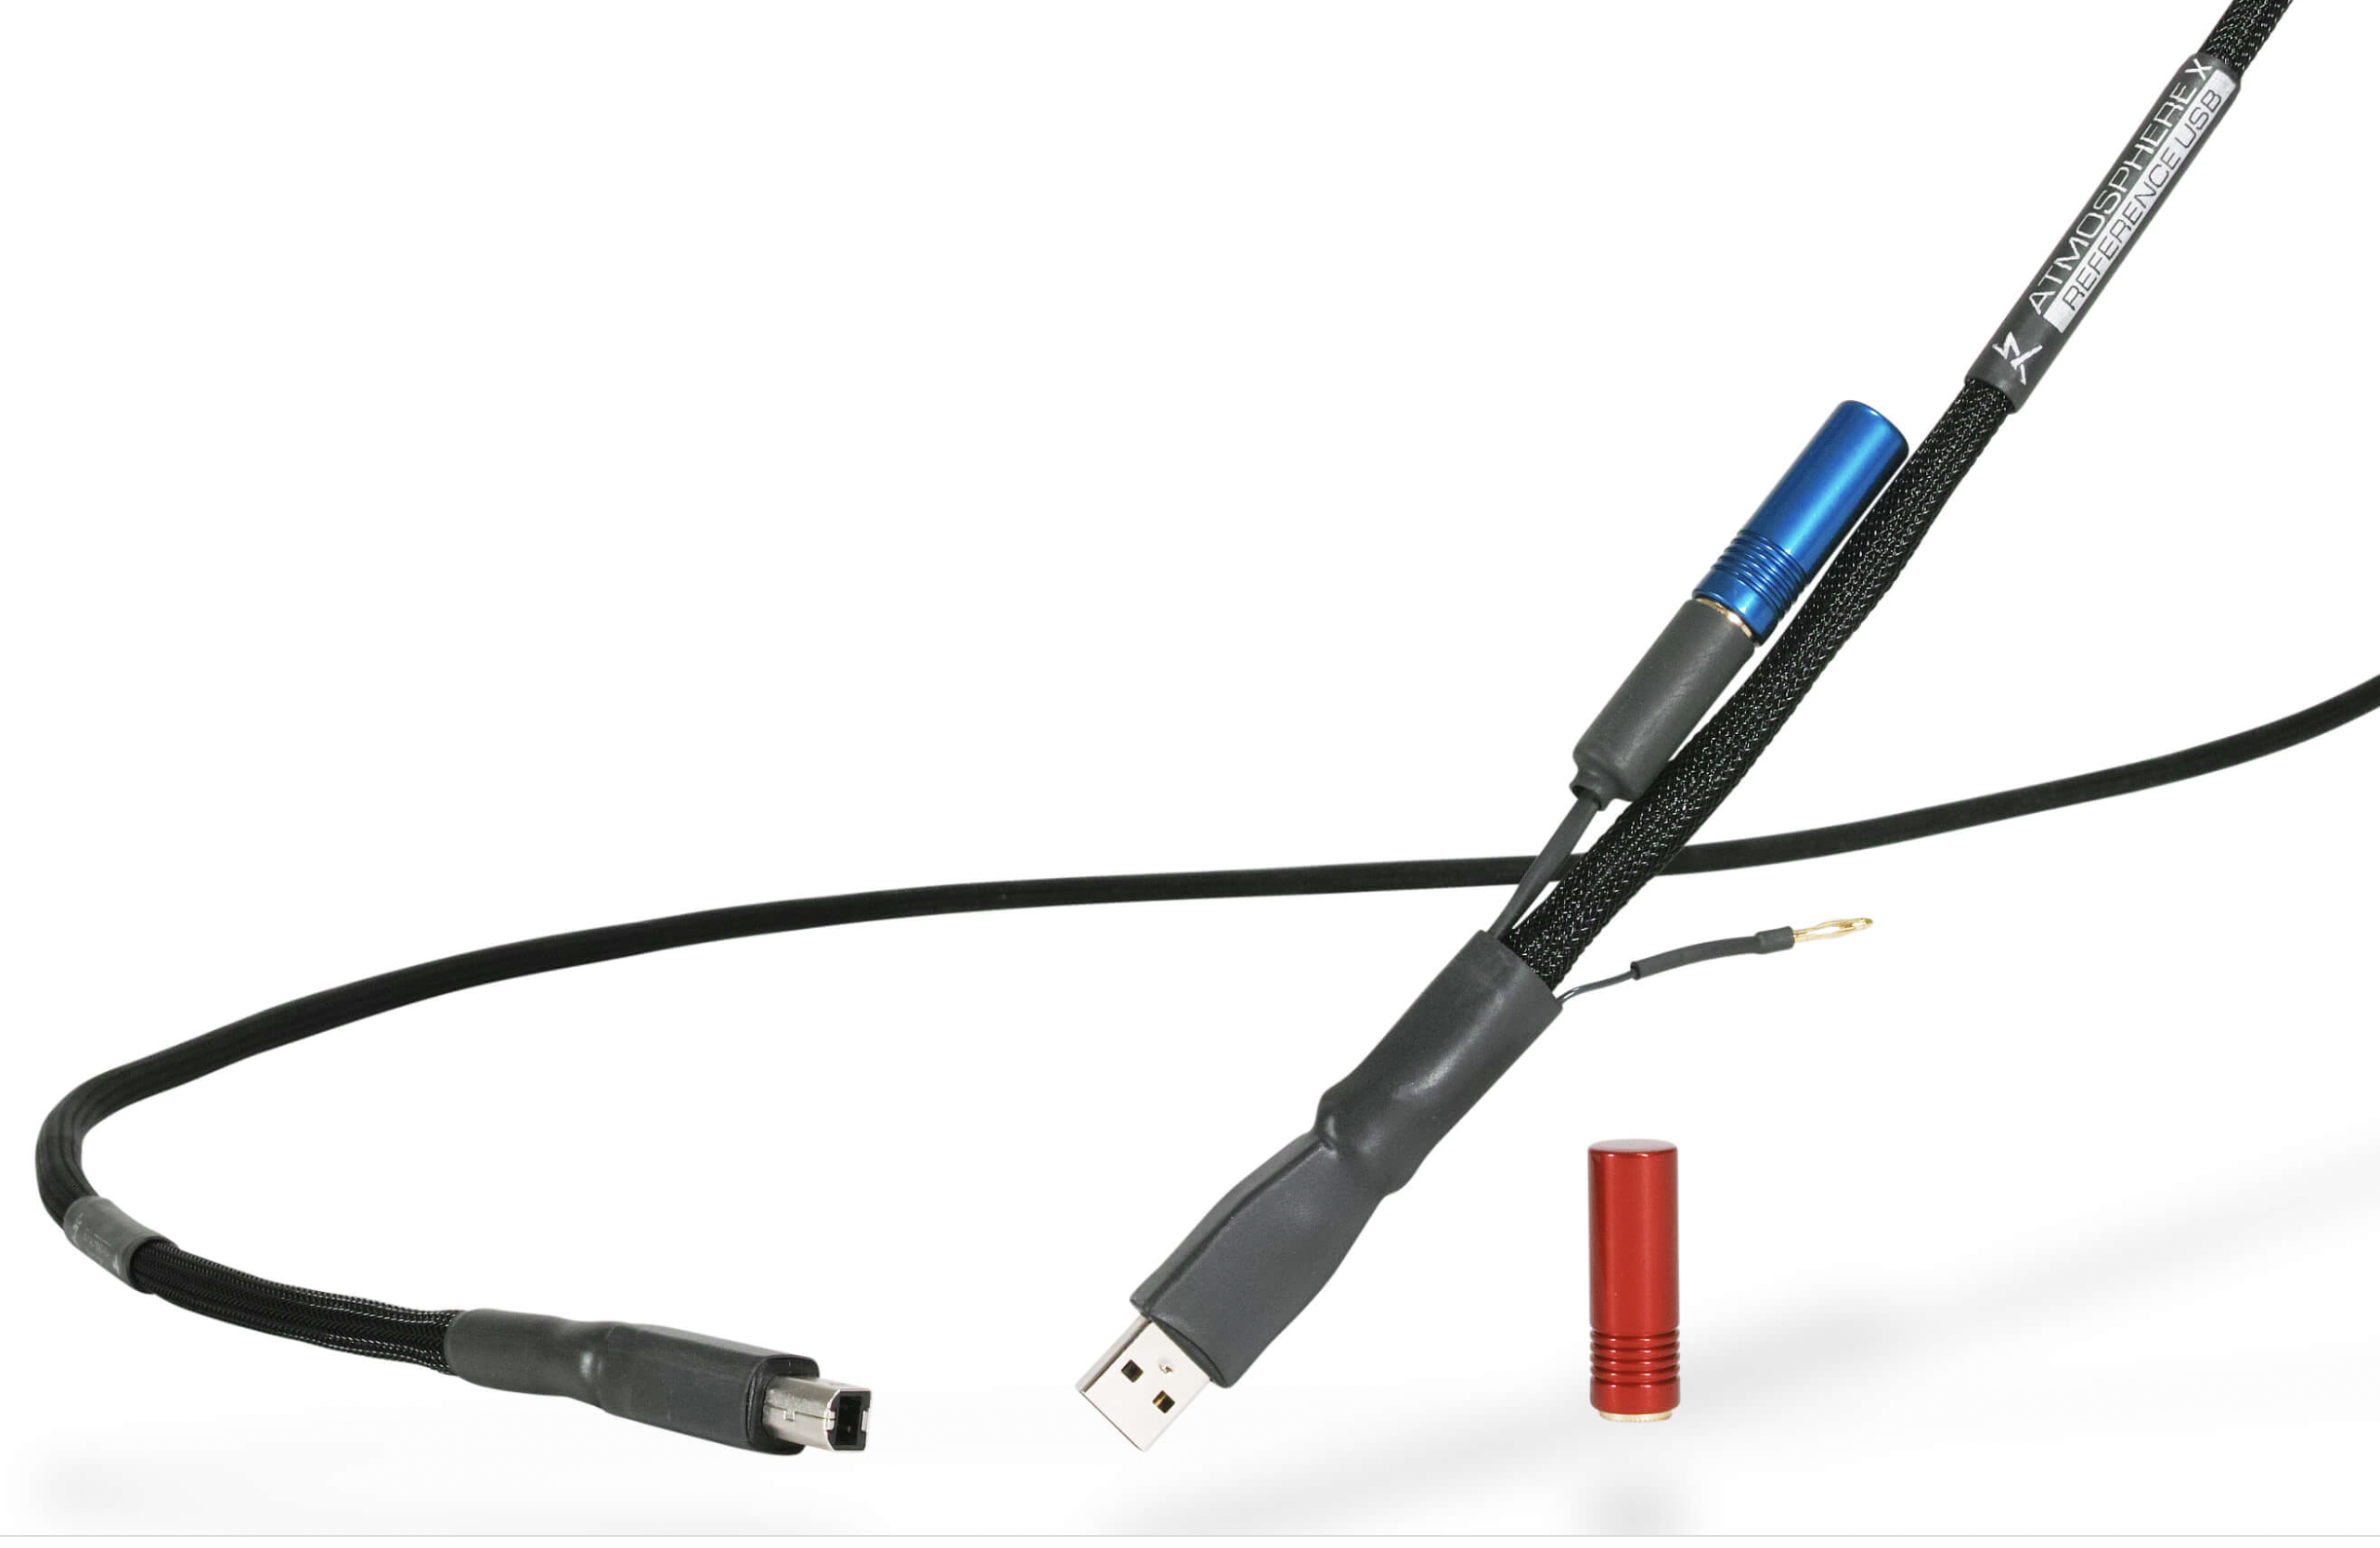 ATMOSPHERE REFERENCE USB CABLE